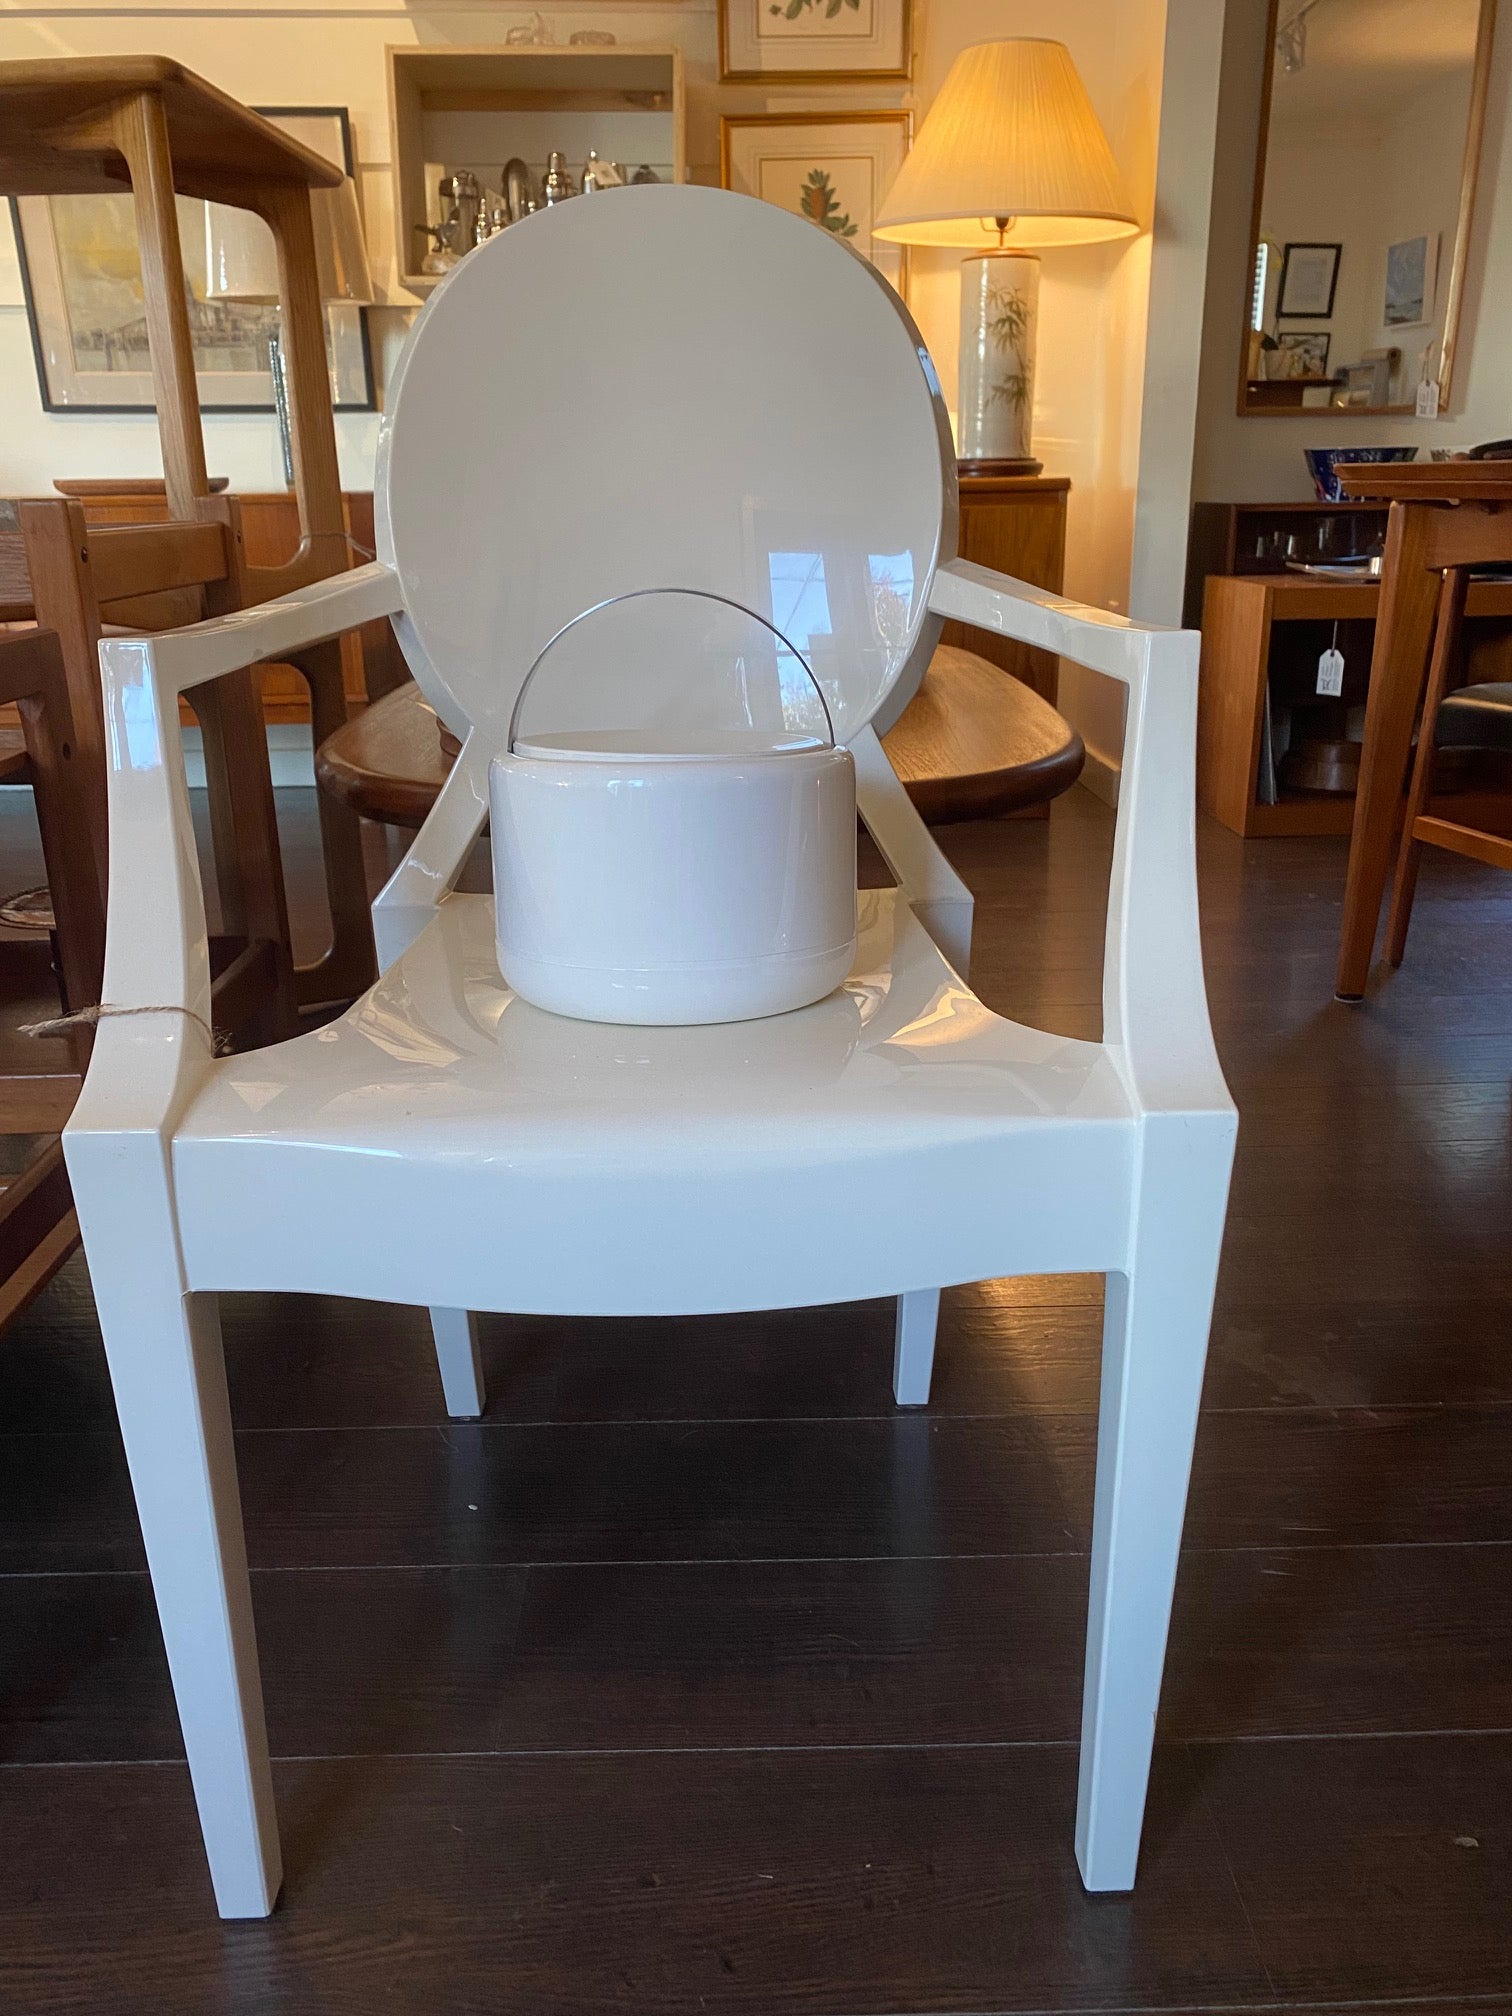 Fabulous 1970s Mid-century modern ice bucket with sleek design and hidden handle in white plastic. Designed by Erik Magnussen for Stelton.  In amazing vintage condition on replica white ghost chair. Made in Denmark-Cook Steet Vintage